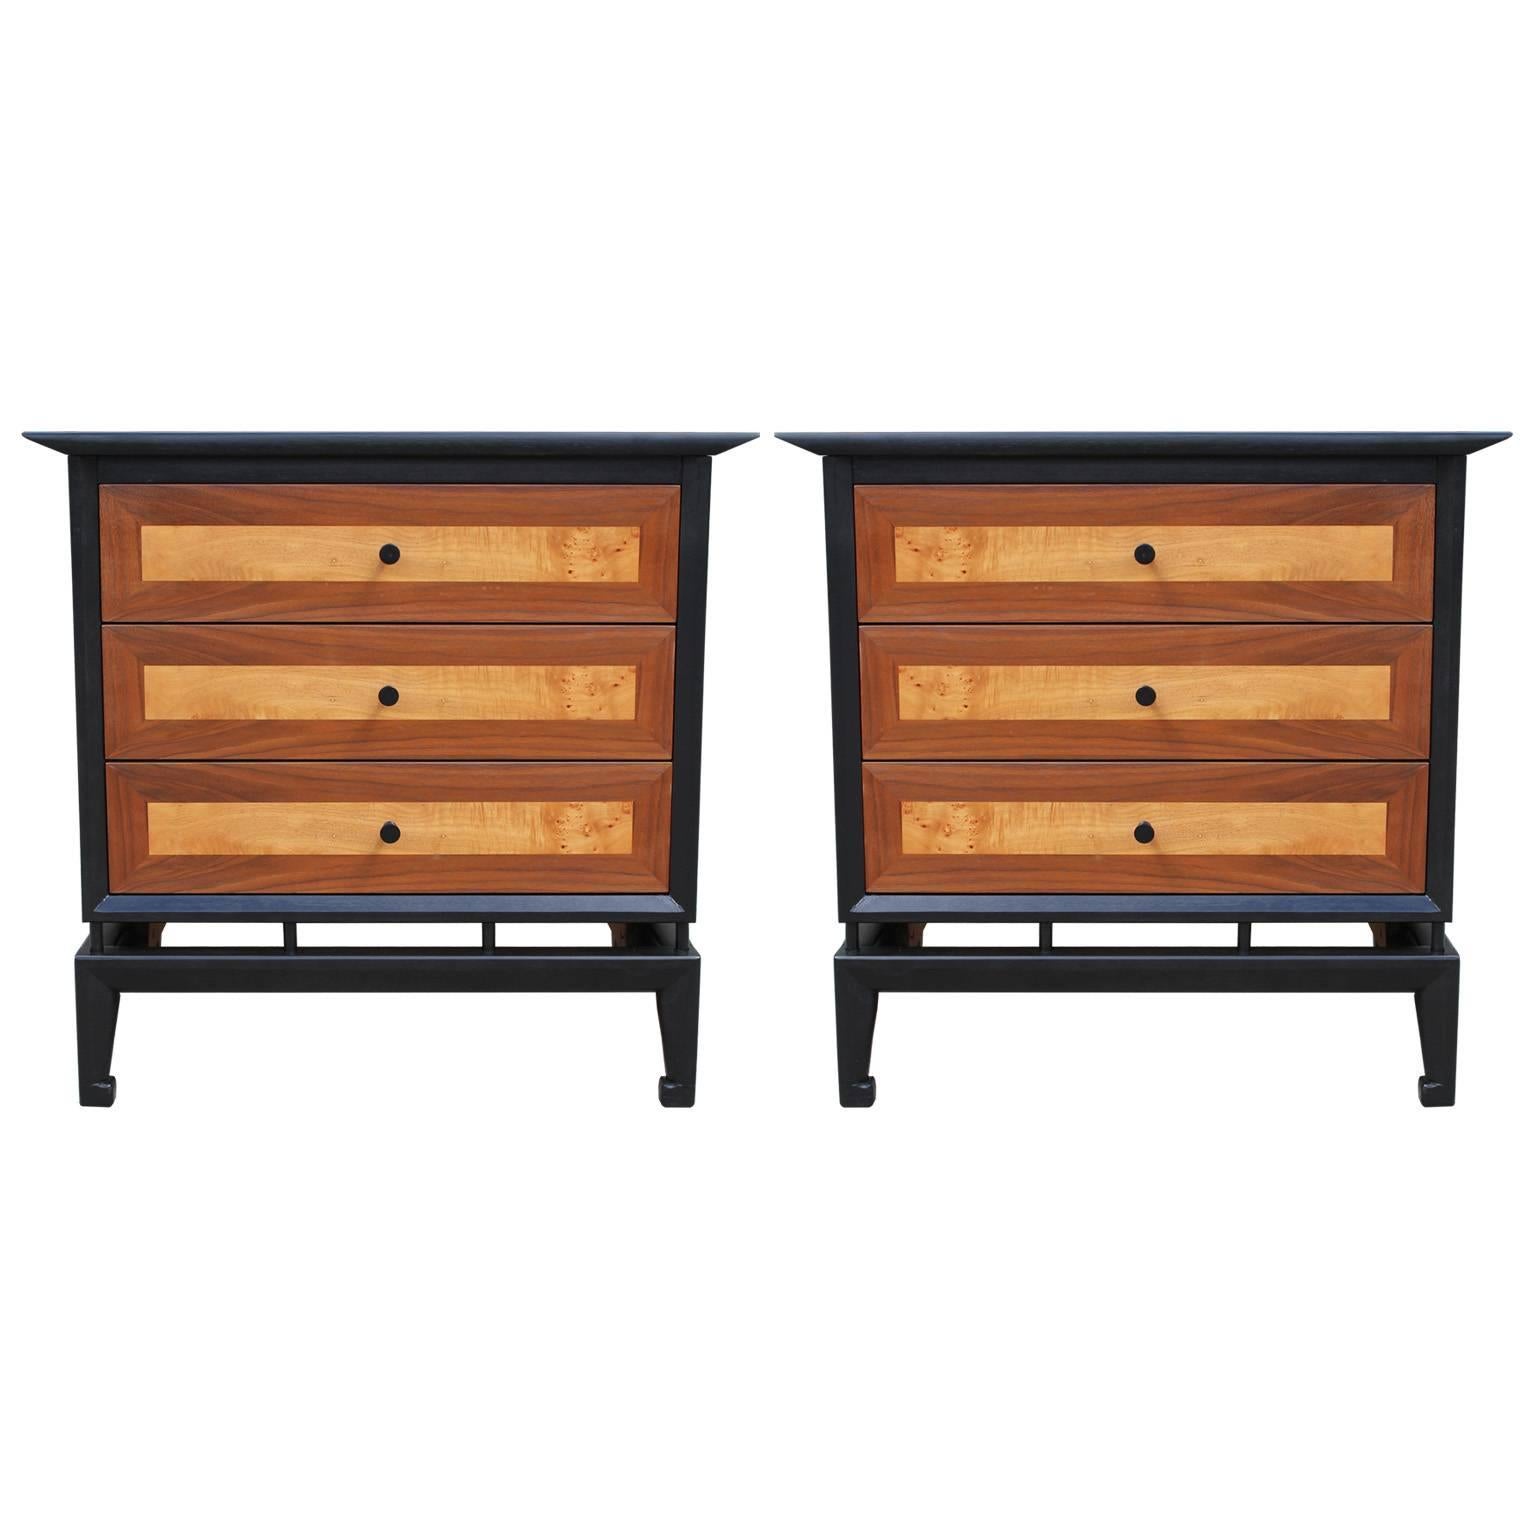 Wonderful Pair of Pagoda Style Nightstands / Chests